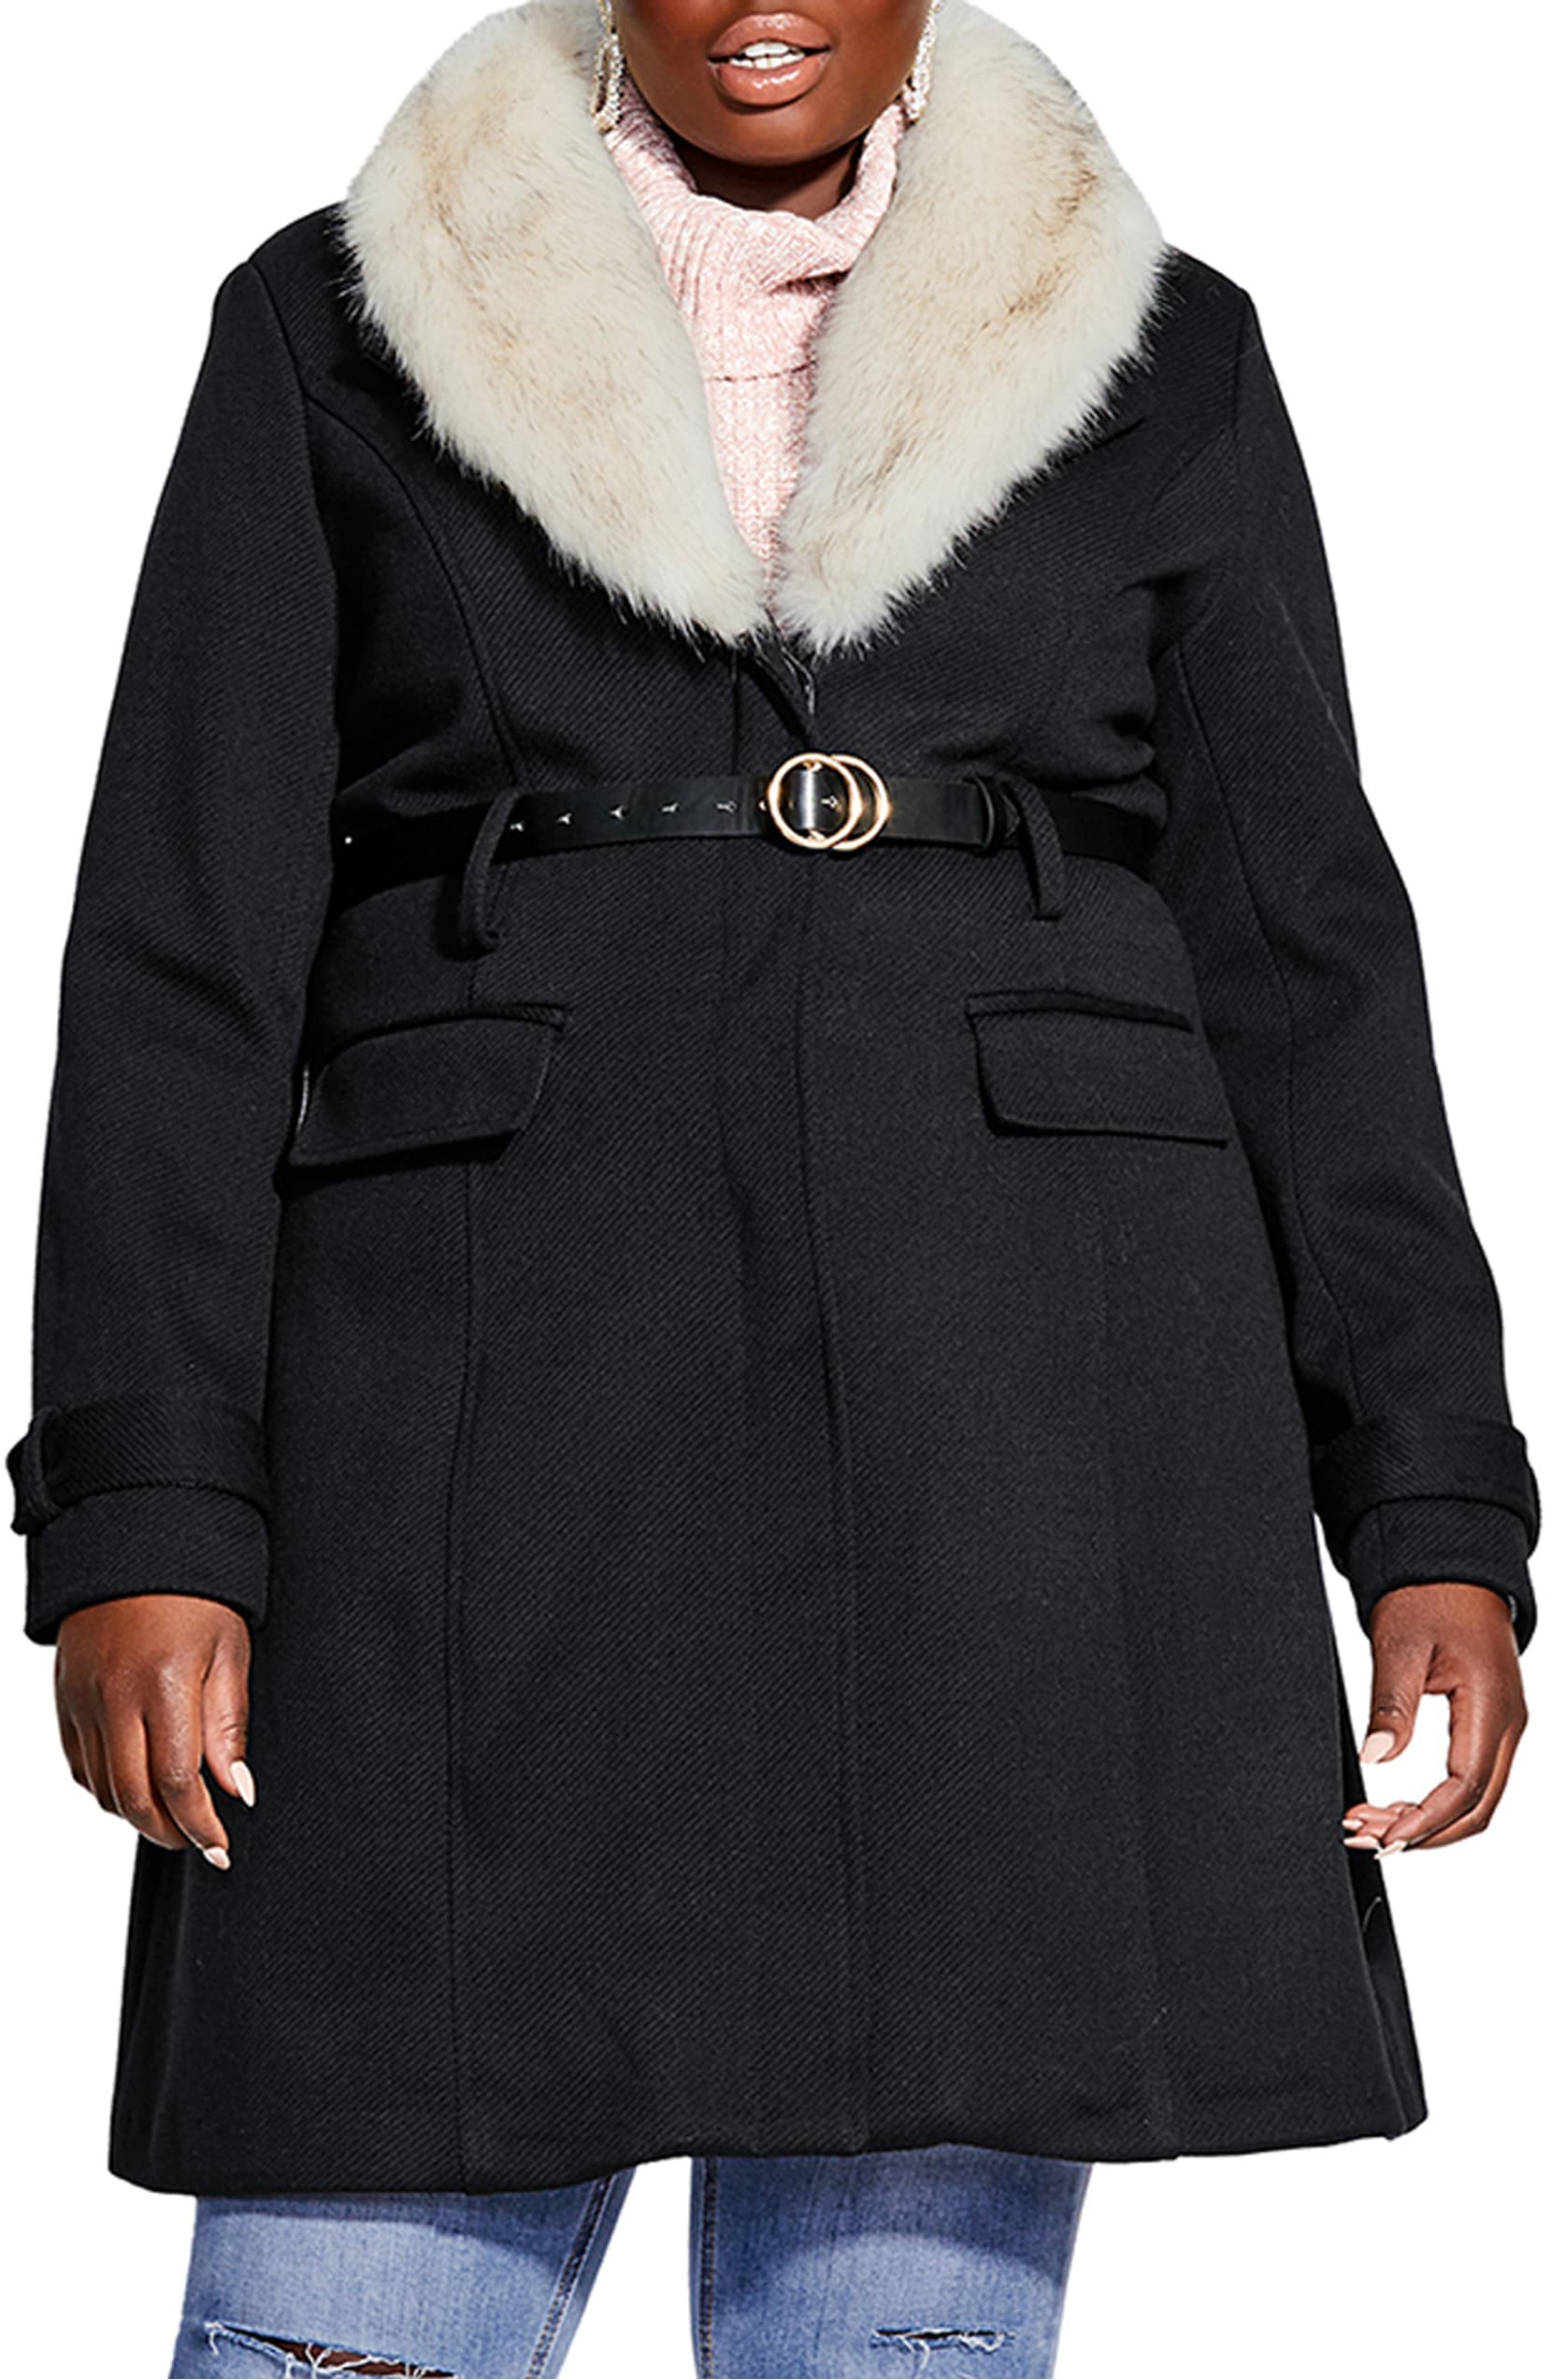 City Chic Belted Jacket with Faux Fur Collar